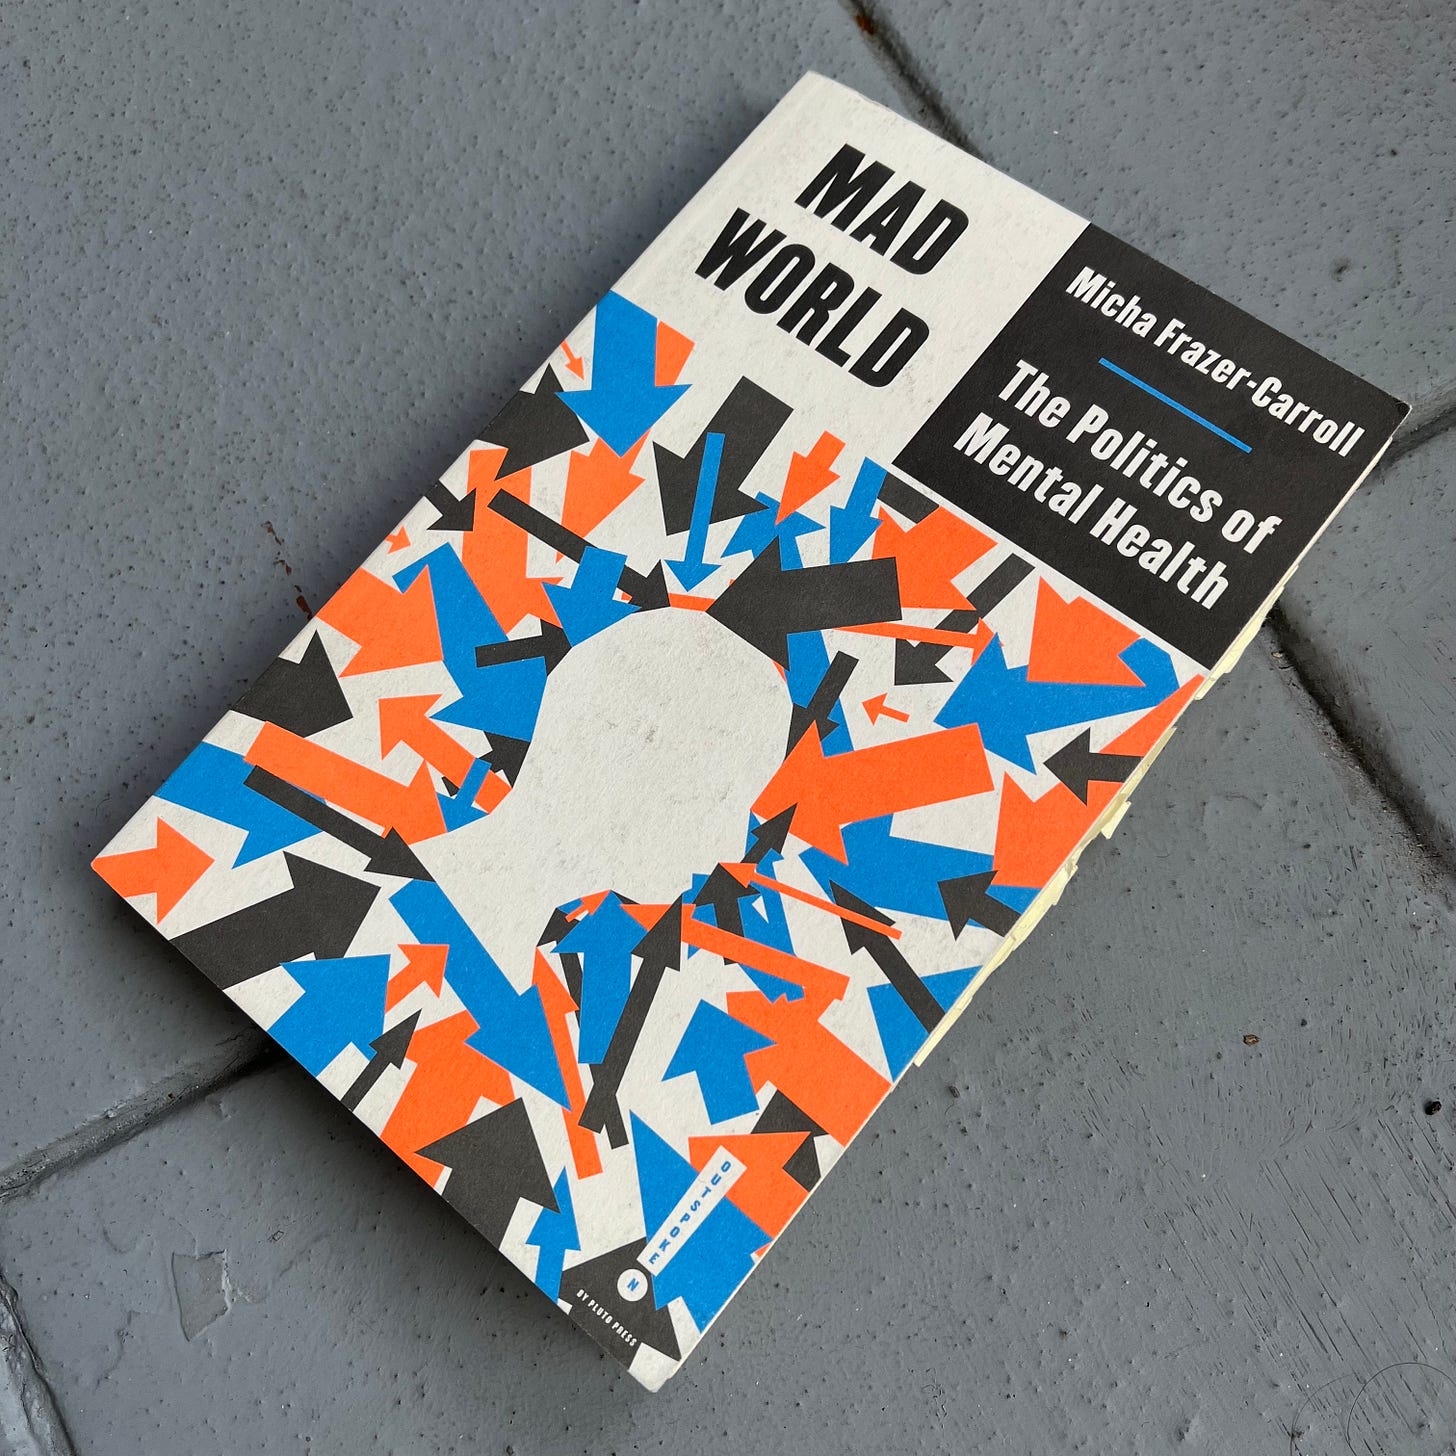 A picture of the book 'Mad World: The Politics of Mental Health' by Micha Frazer-Carroll. The book is resting on a grey tile floor.